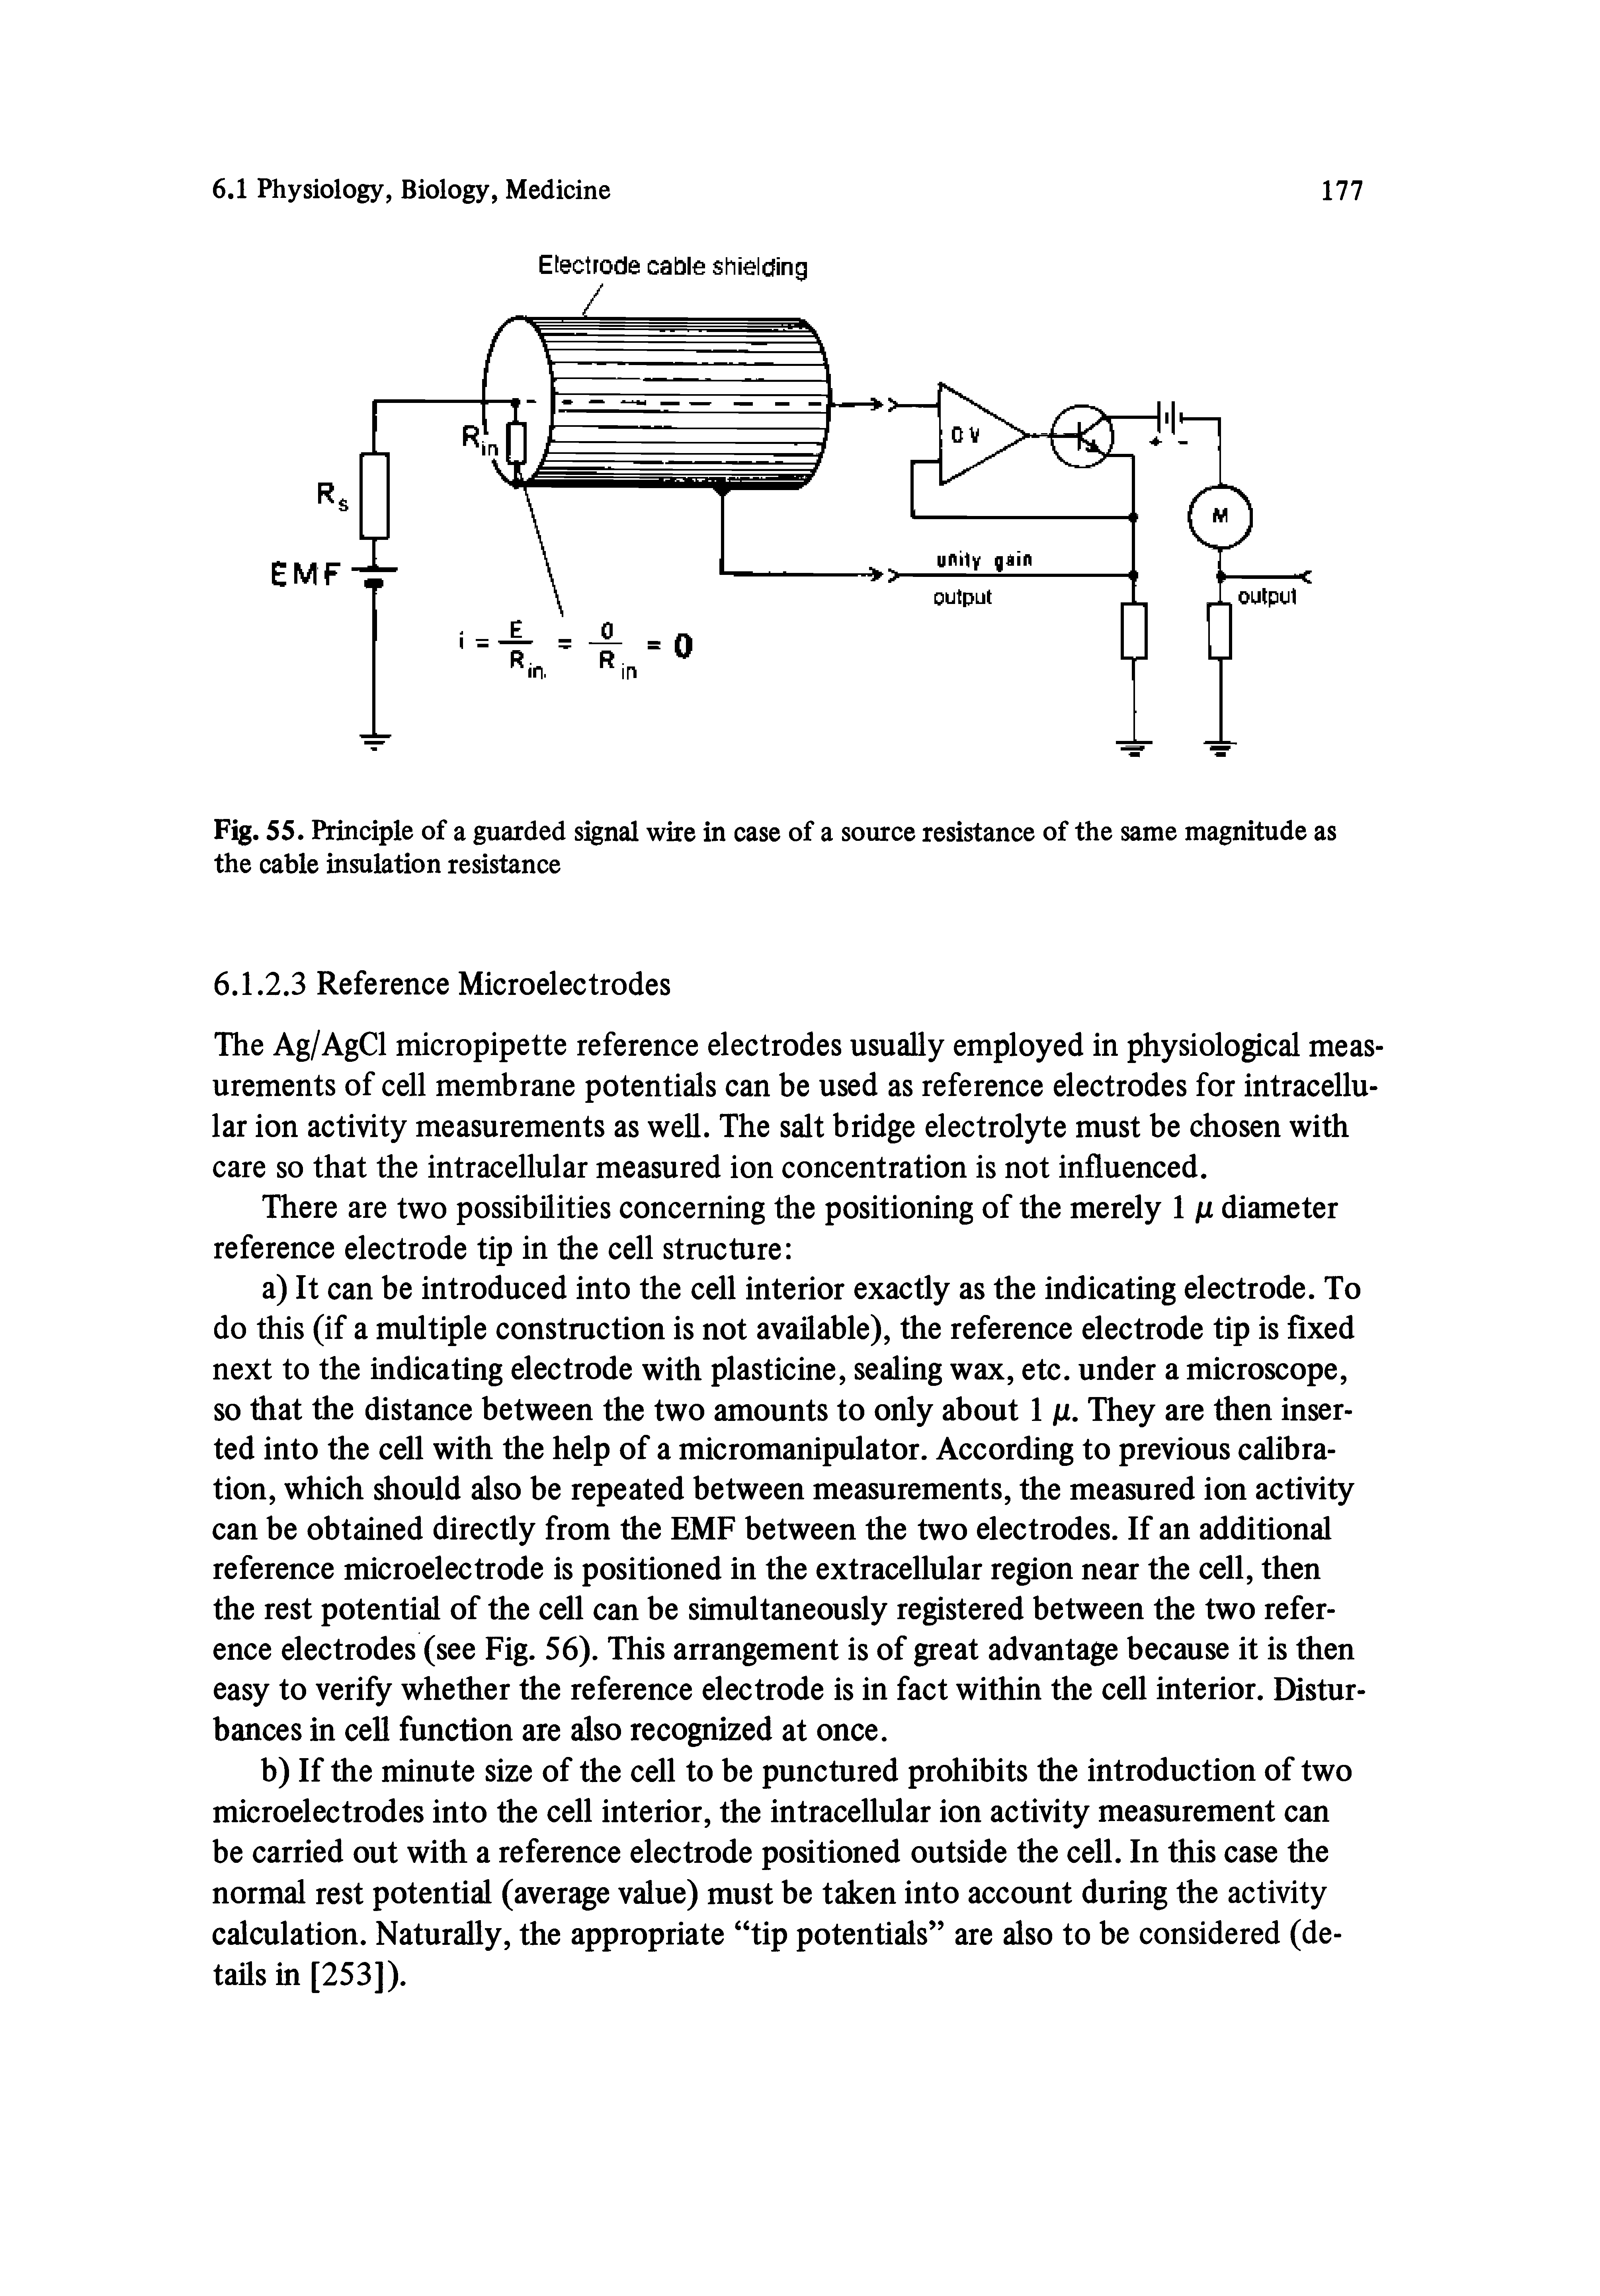 Fig. 55. Principle of a guarded signal wire in case of a source resistance of the same magnitude as the cable insulation resistance...